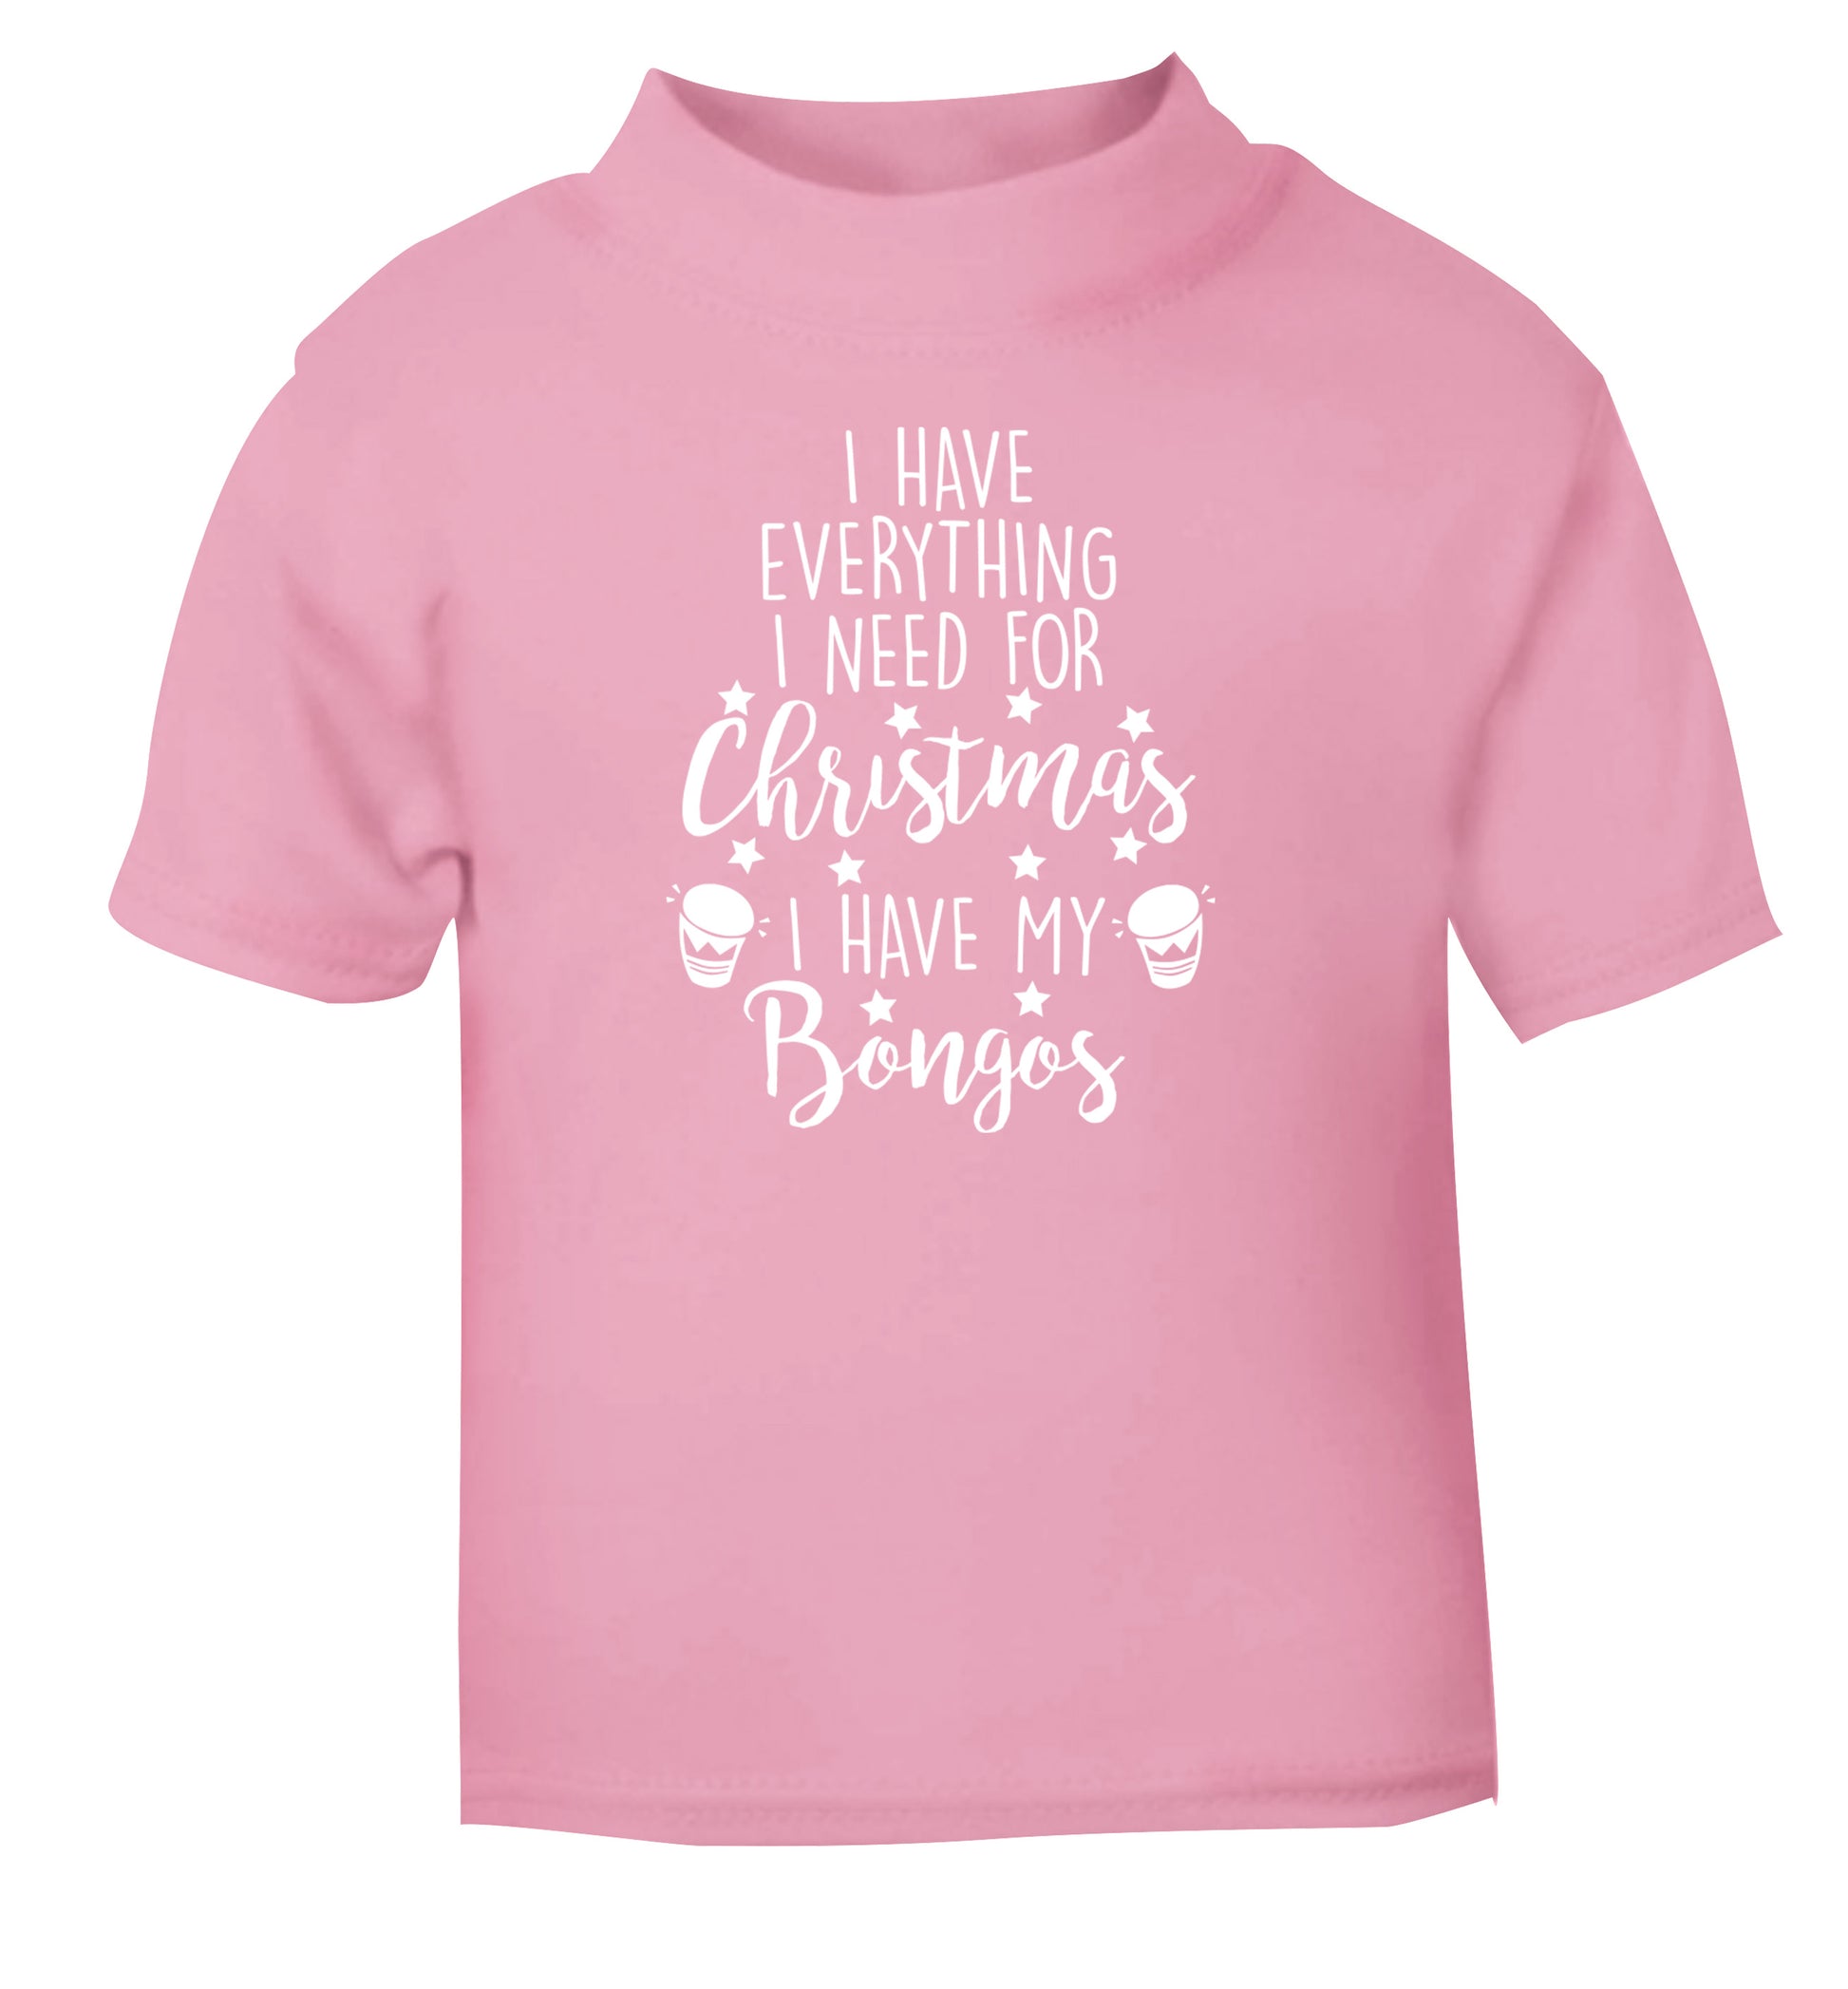 I have everything I need for Christmas I have my bongos! light pink Baby Toddler Tshirt 2 Years